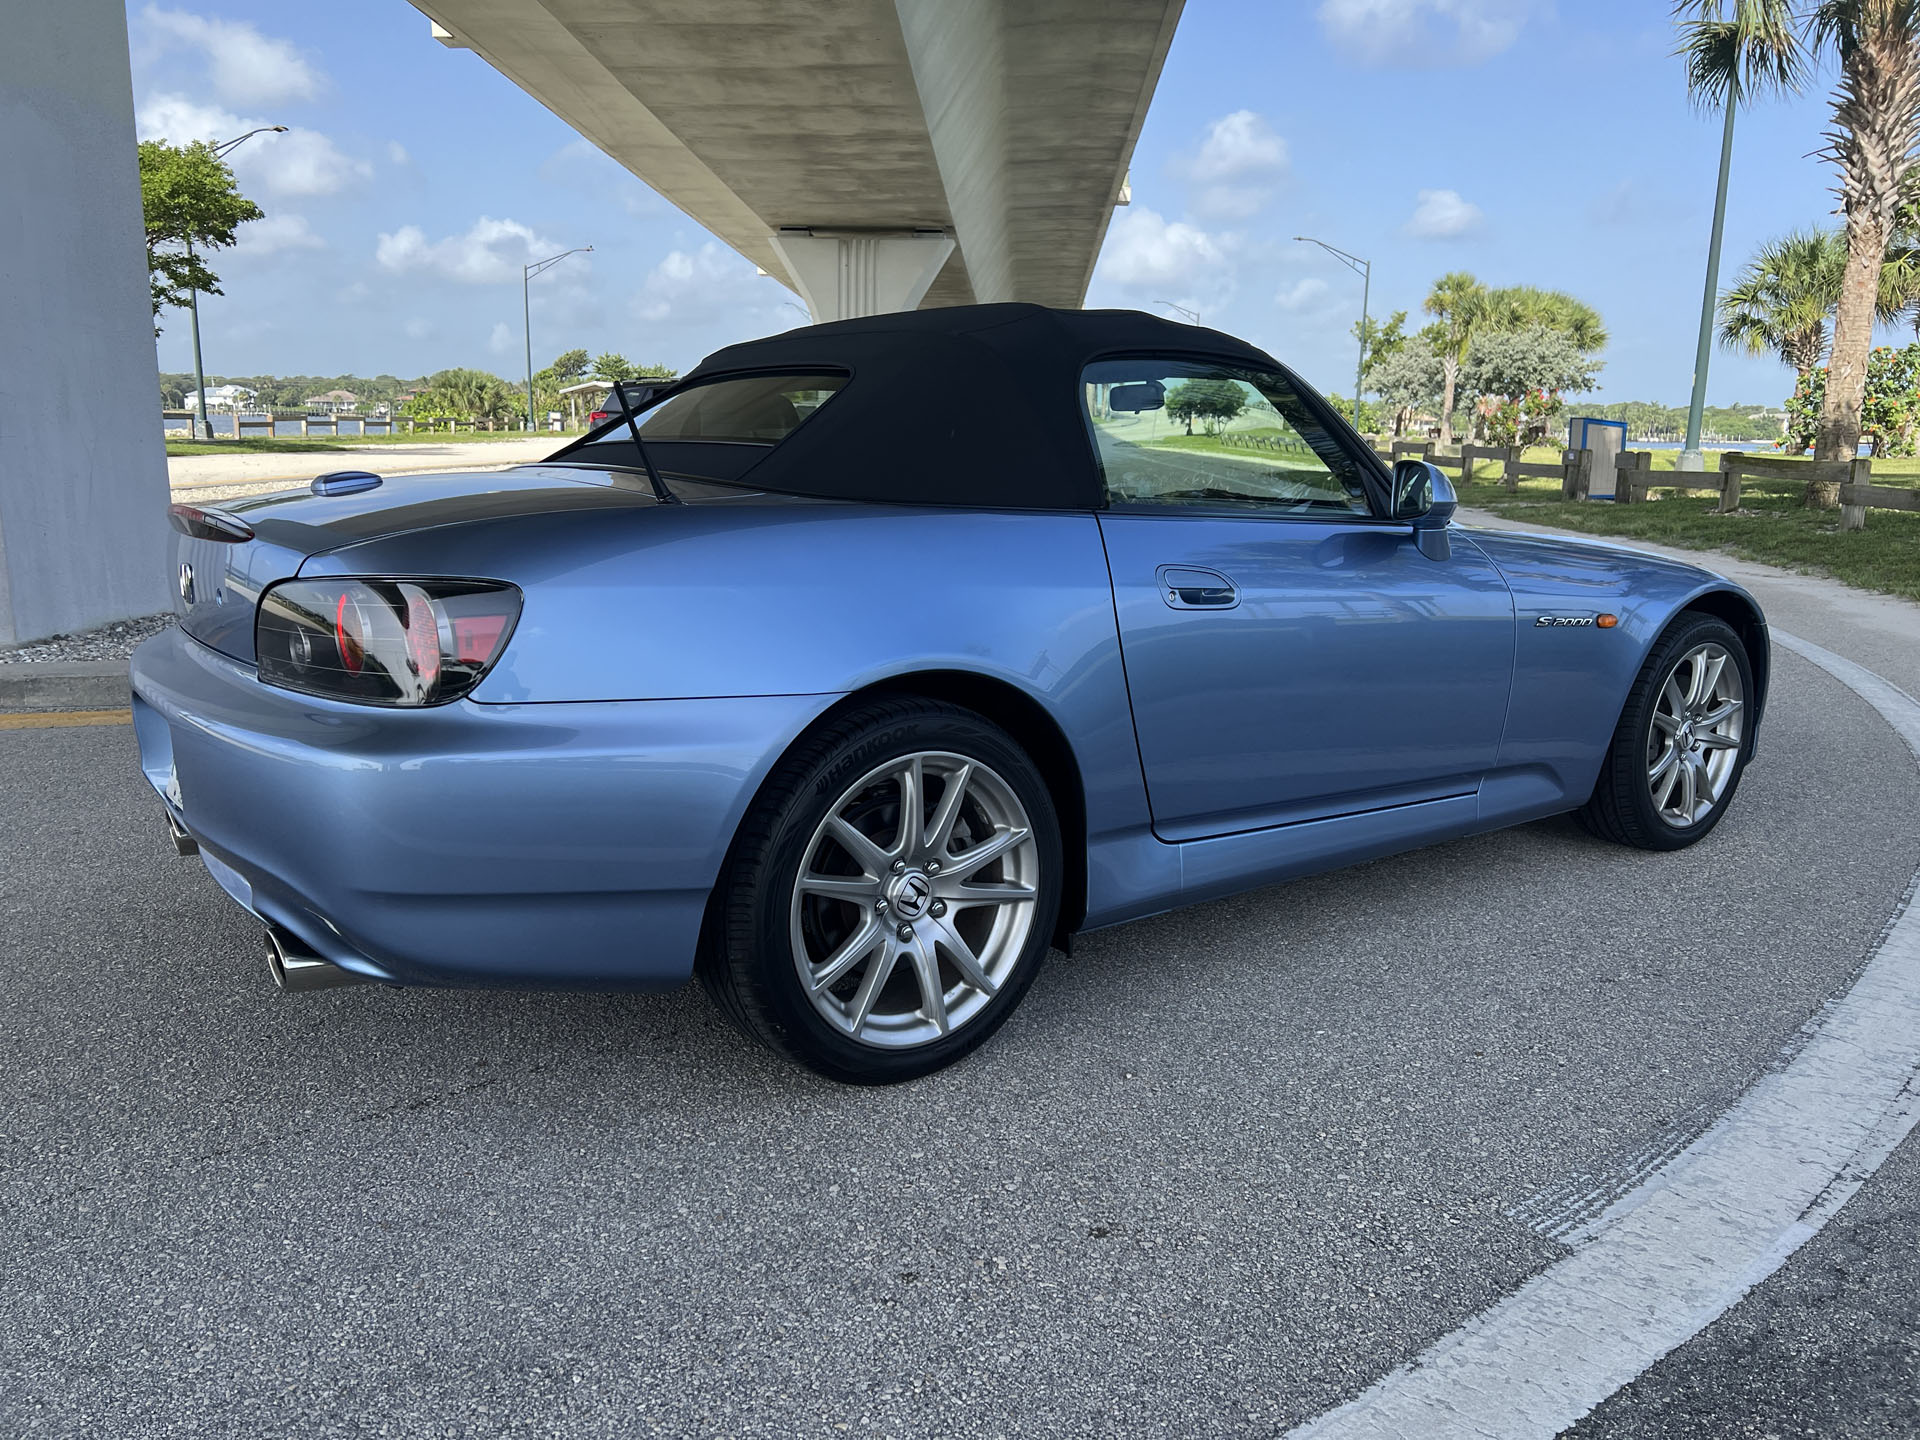 2000–03 Honda S2000 values have surpassed contemporary Boxsters and Z3s -  Hagerty Media